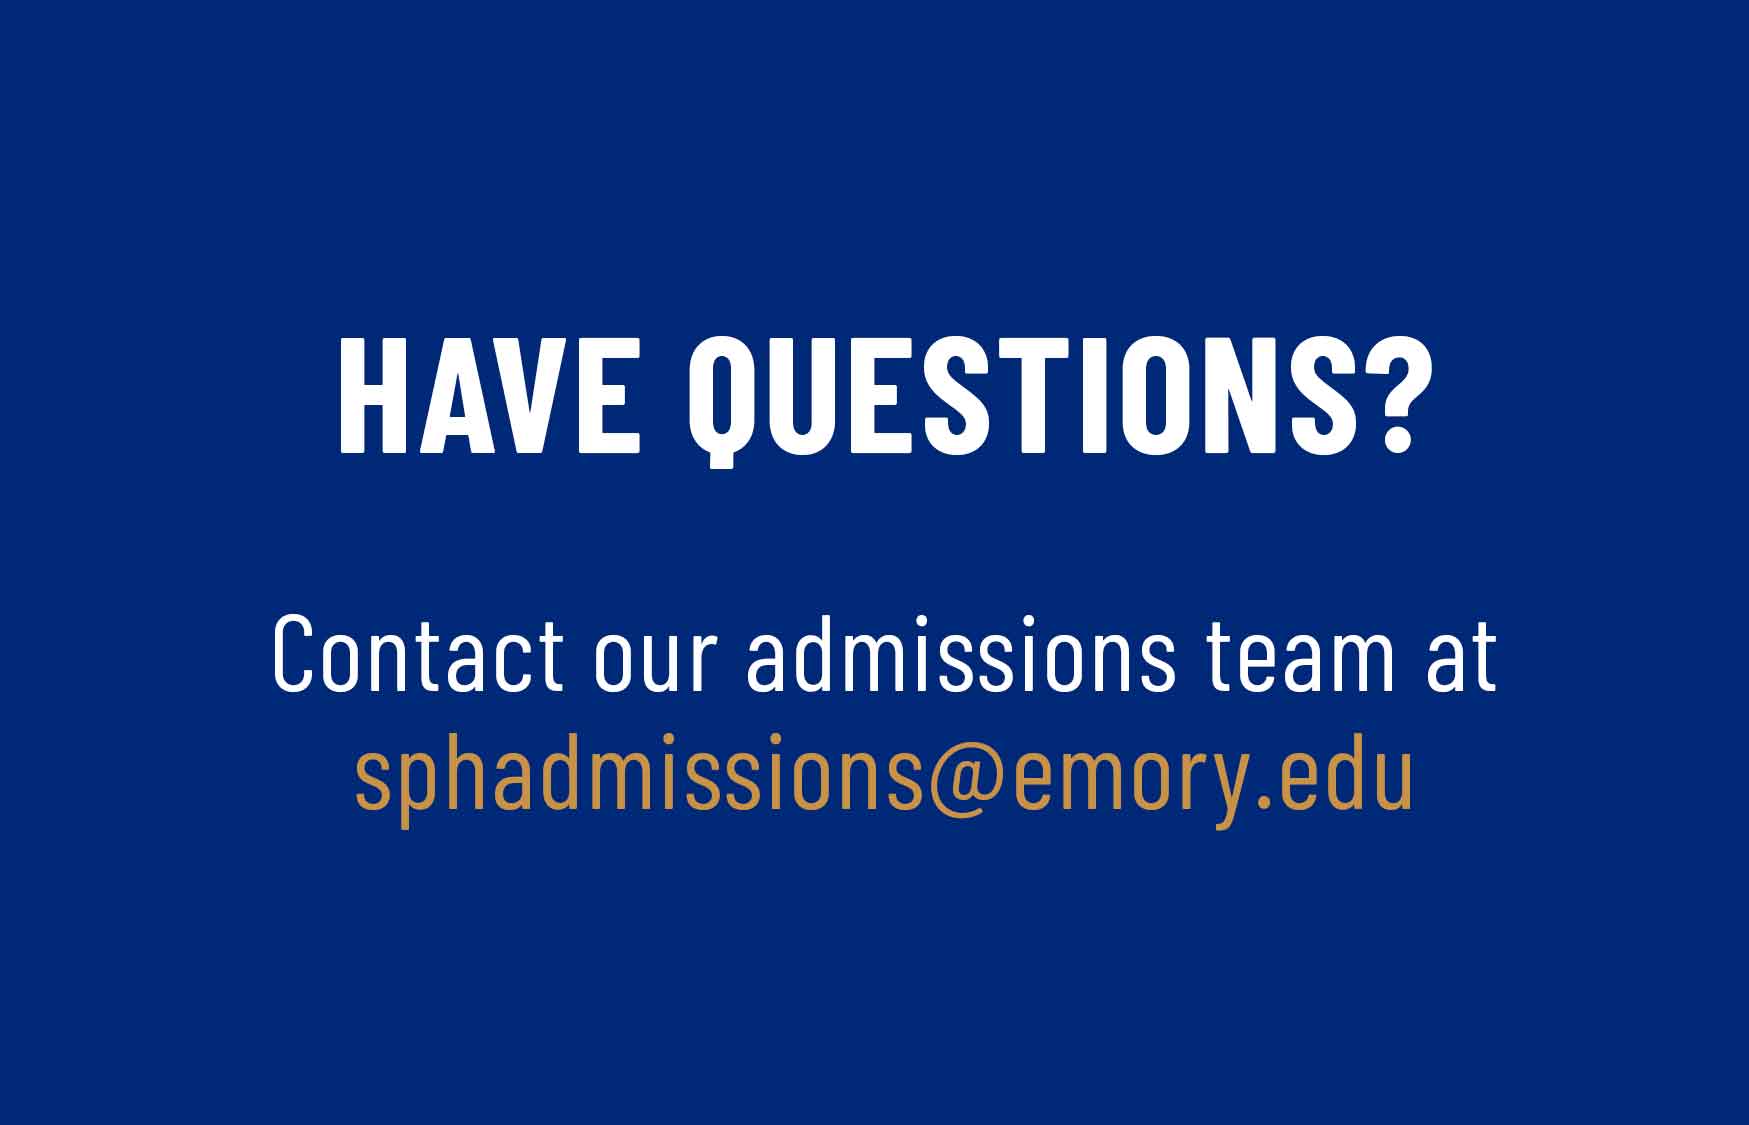 HAVE QUESTIONS? Contact the admissions team at sphadmissions@emory.edu